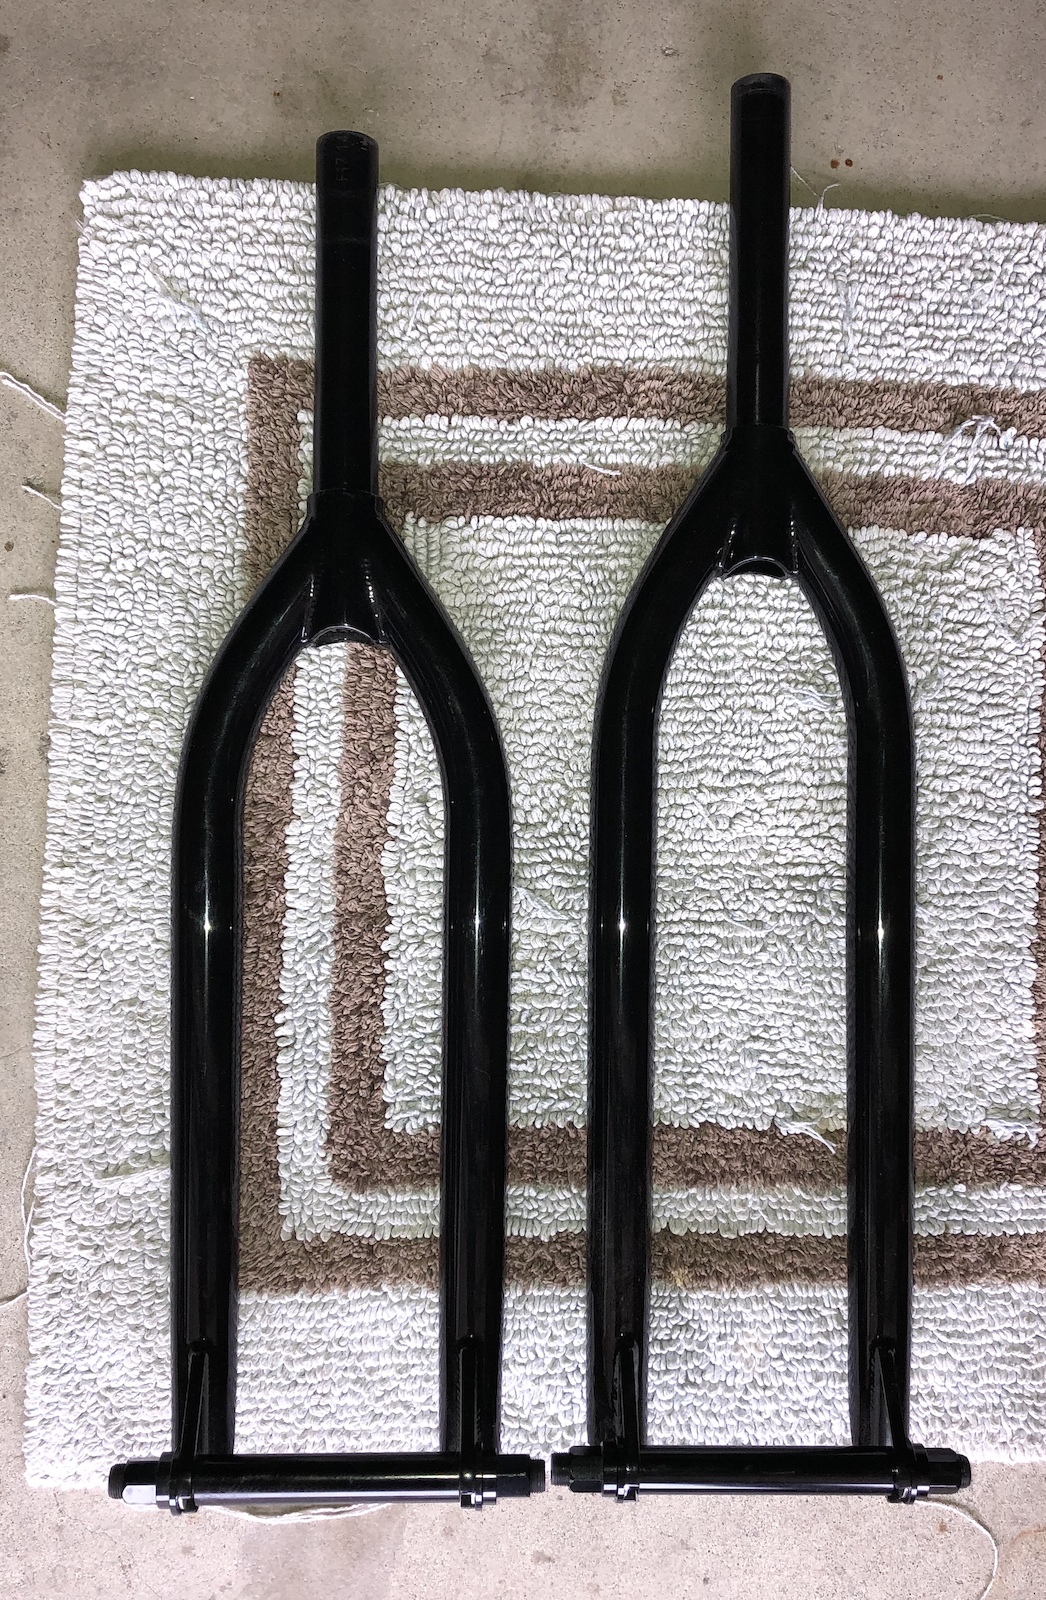 Identiti Rebate 14/20 forks.
425 vs. 465
Literally the strongest rigid forks out there.